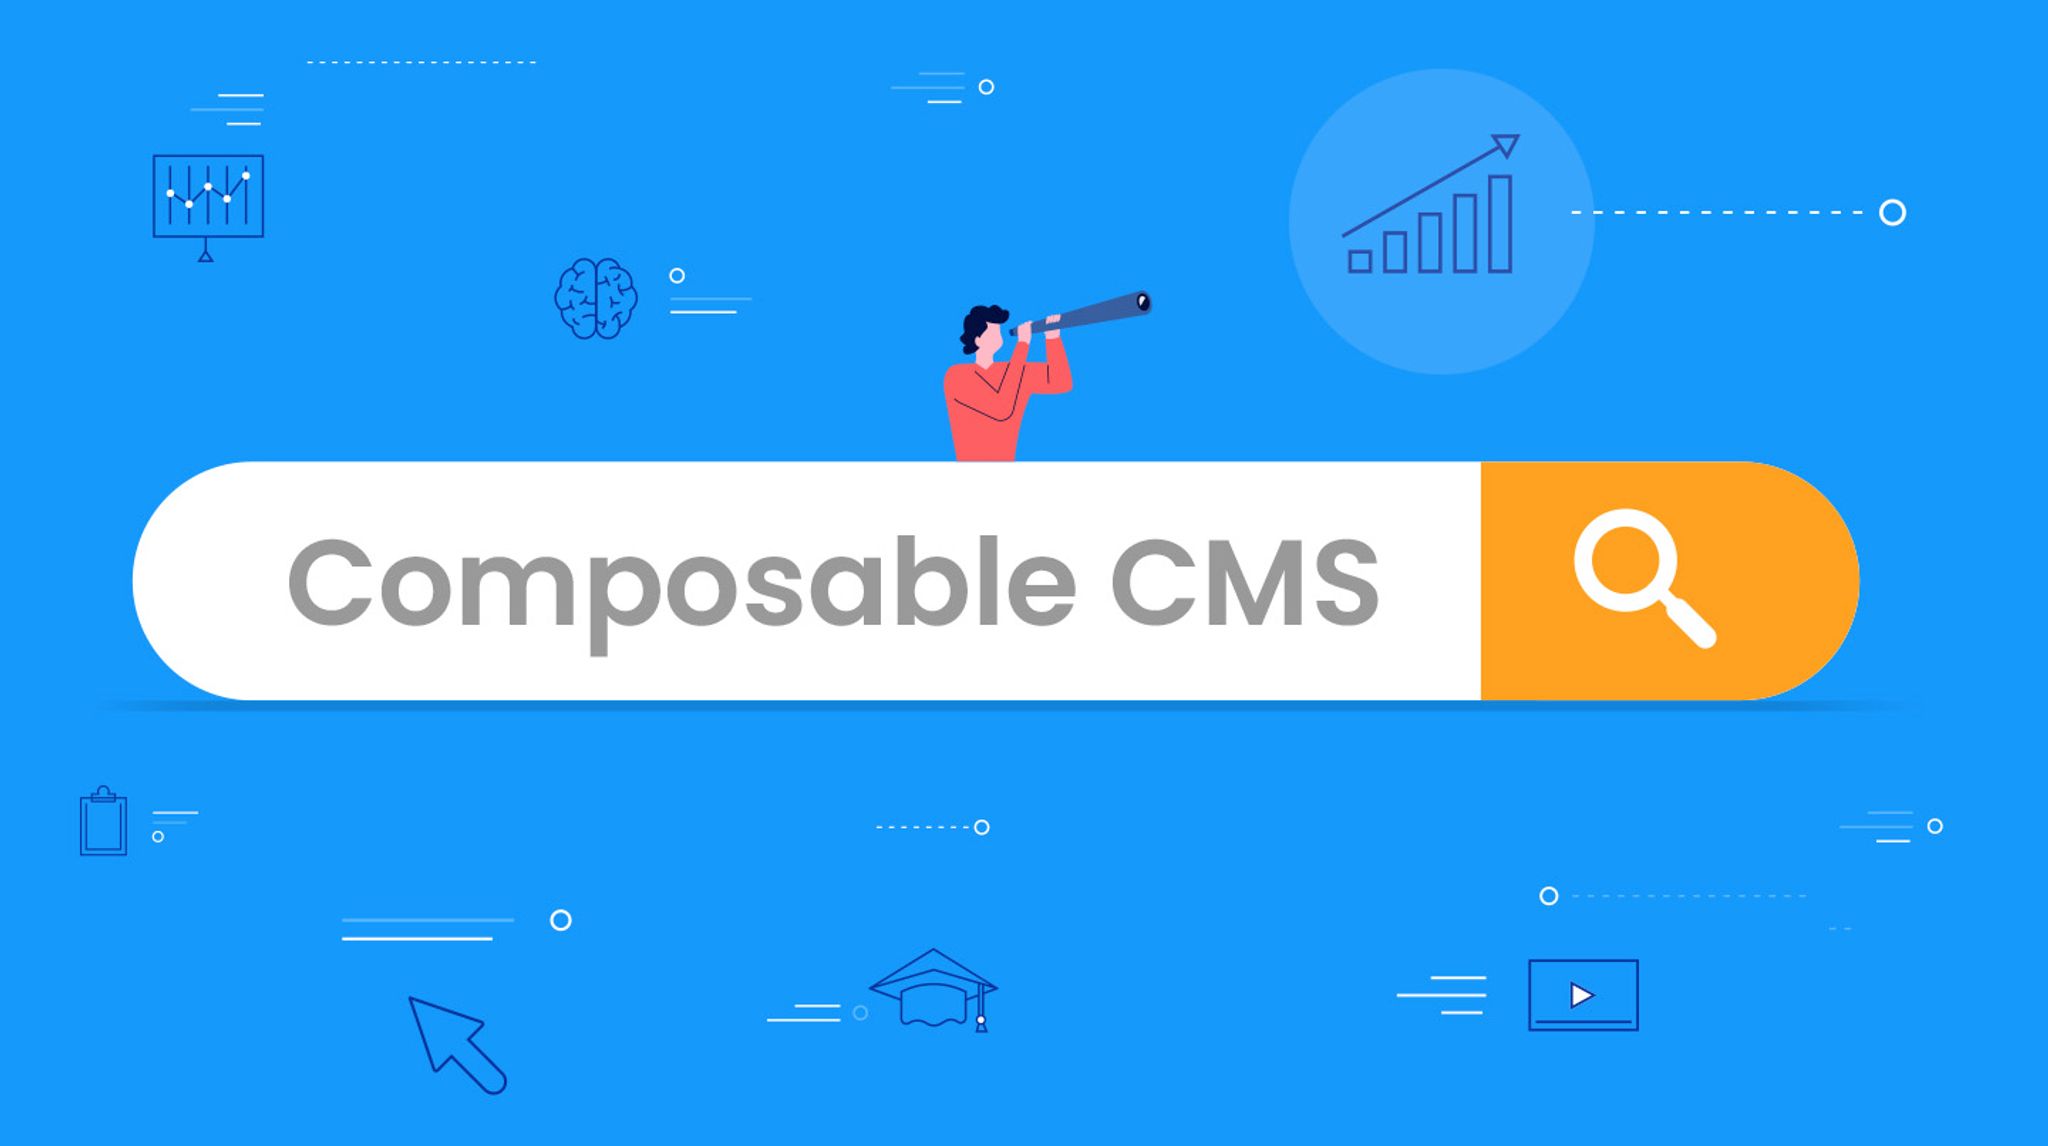 Composable CMS as a keyword search term in Google